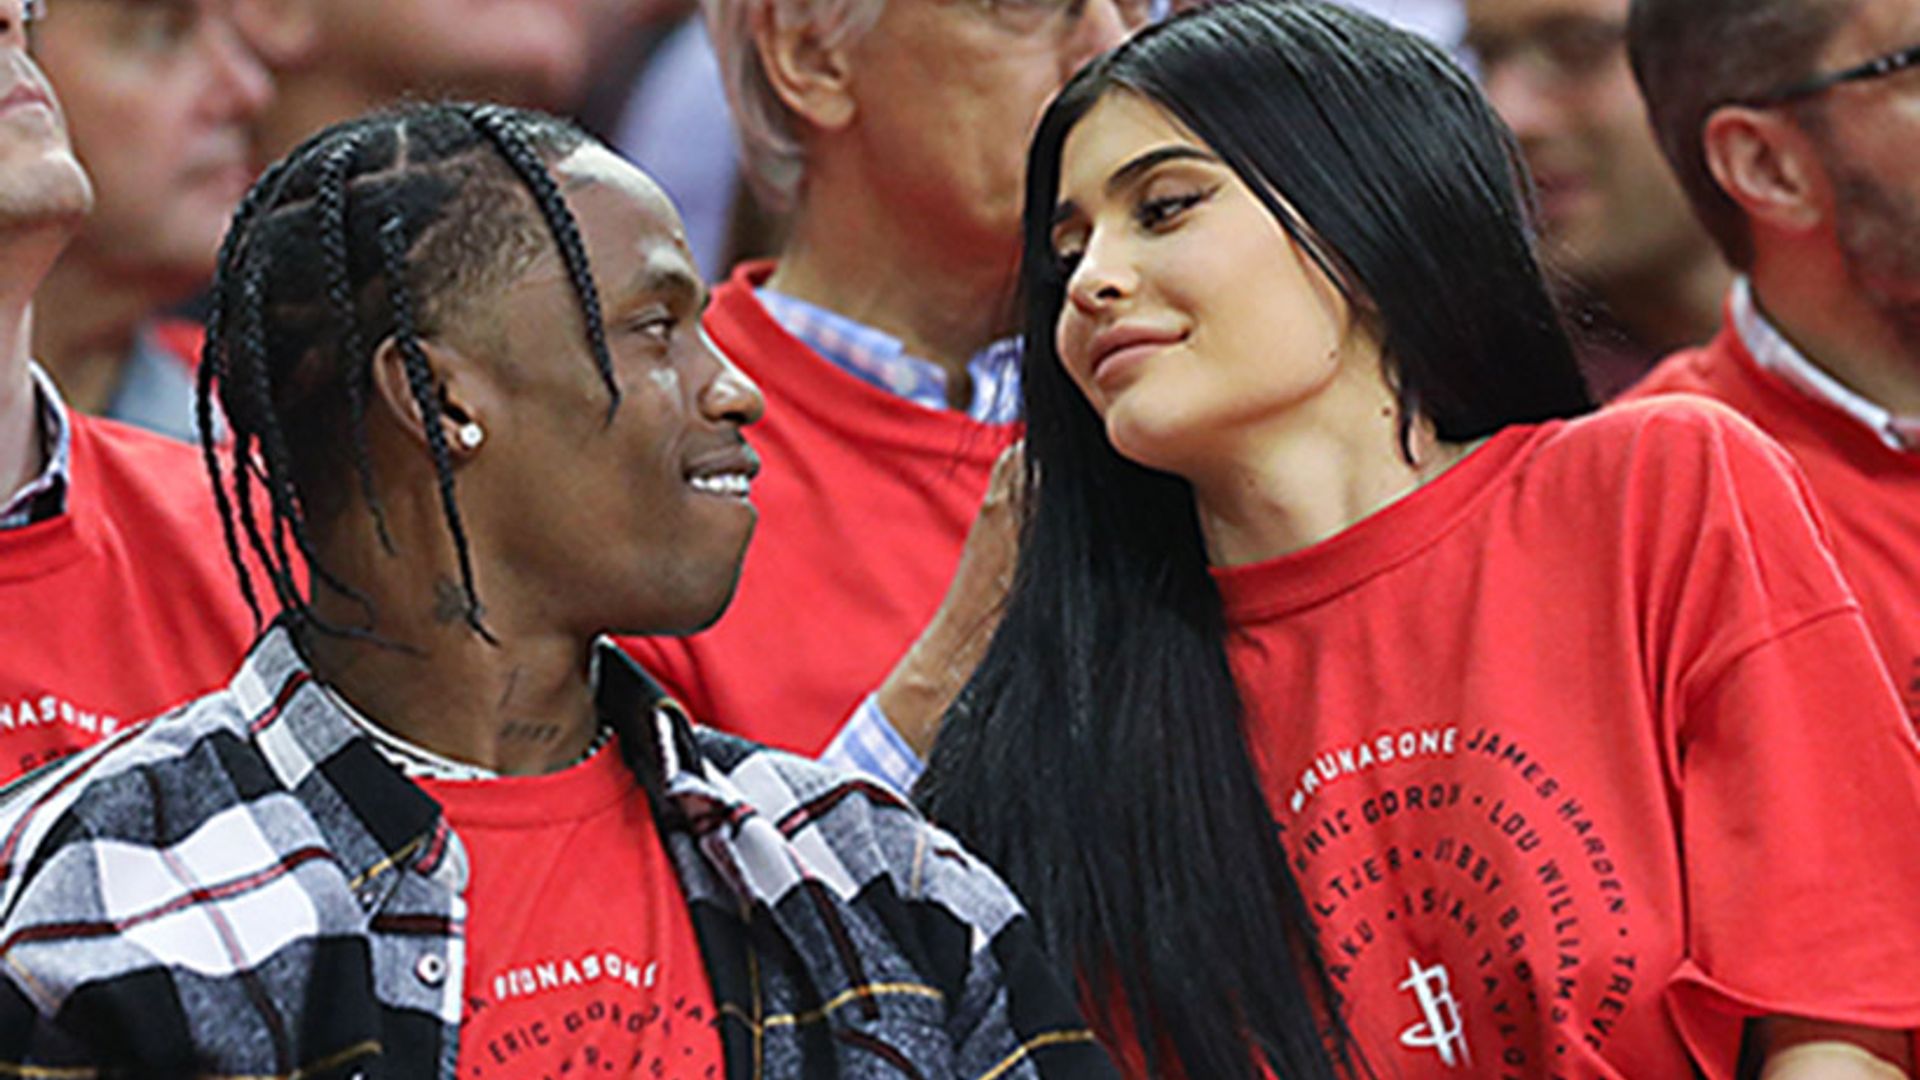 Kylie Jenner and Travis Scott 'expecting their first baby' – find out more!